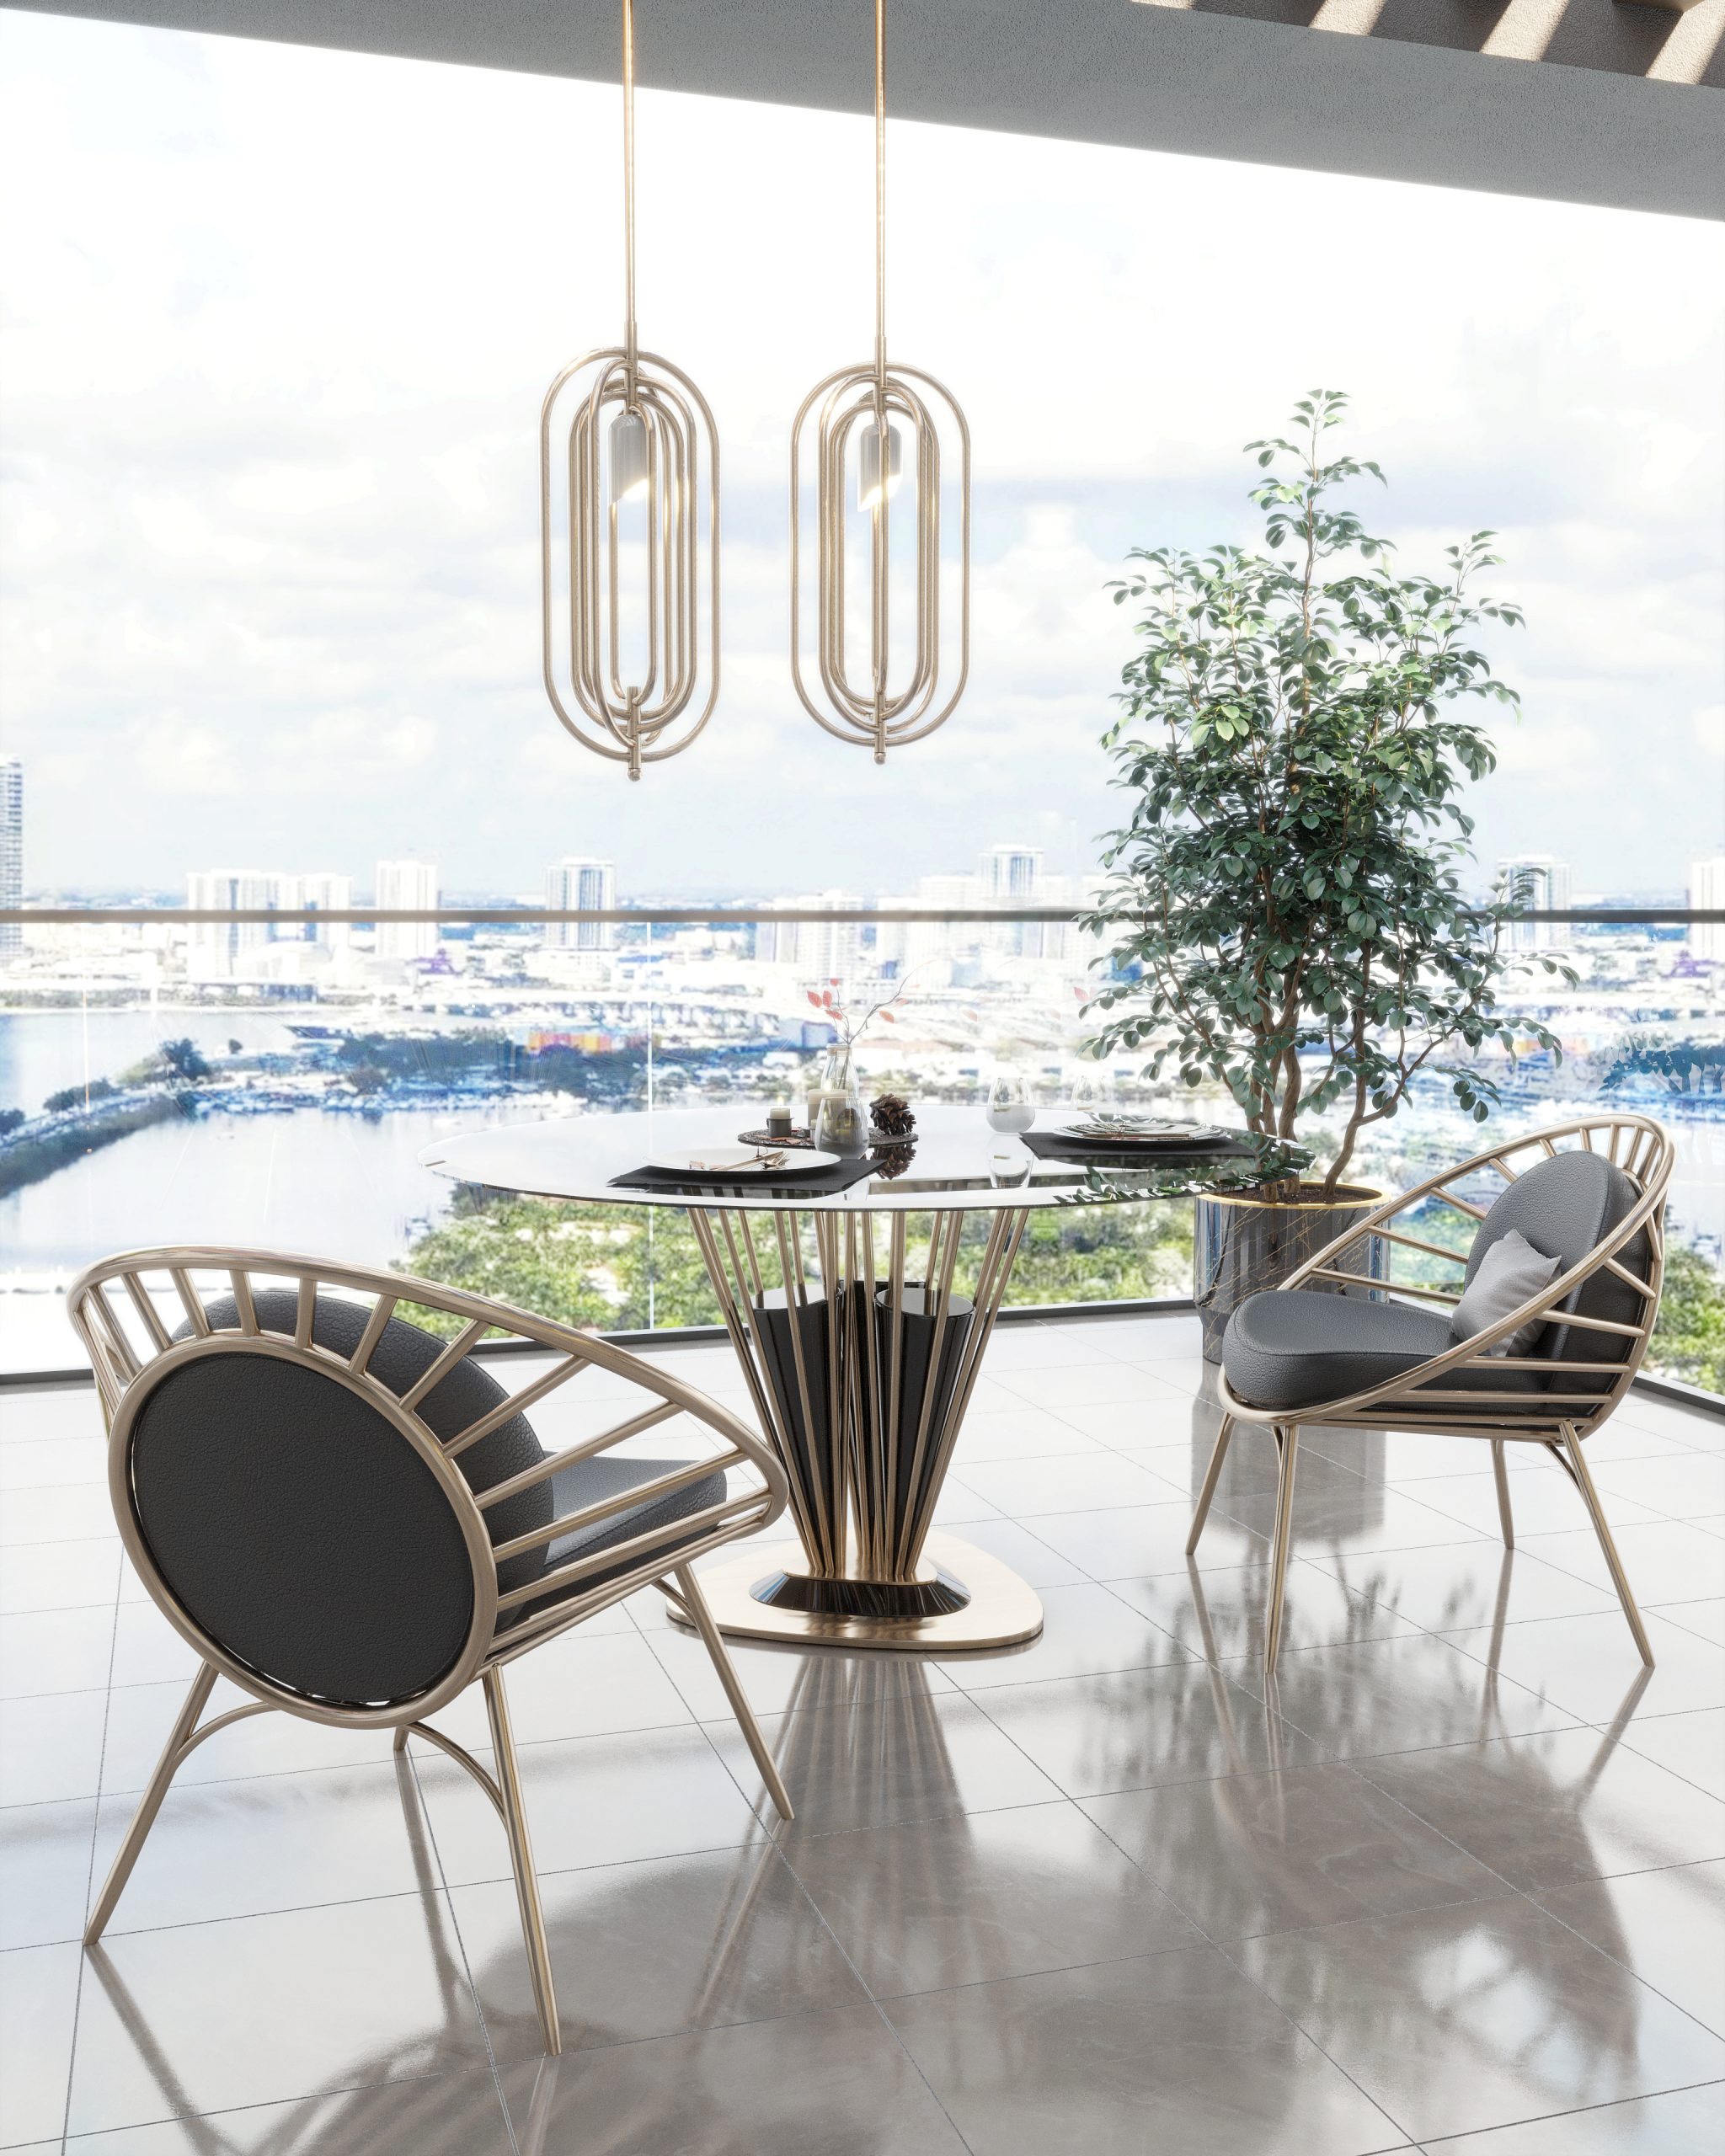 Shop The Look: Discover How You Can Pull Off The Glamorous Balcony of Pepe Calderin’s Penthouse in Miami